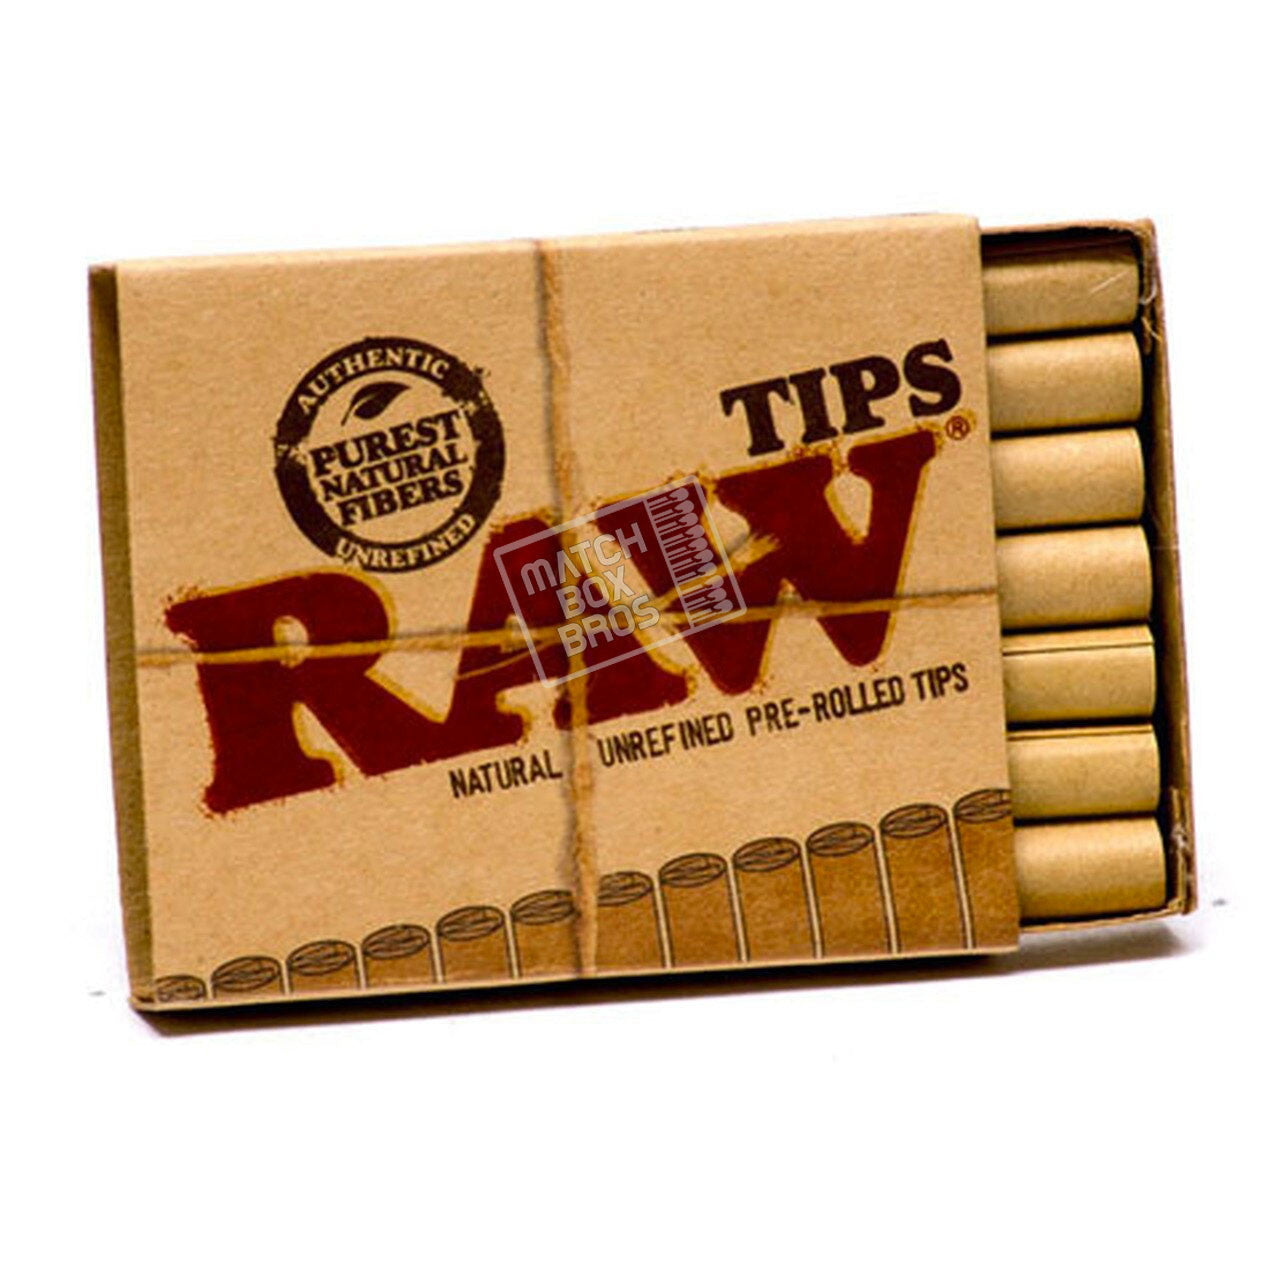 RAW pre-rolled tips box interior